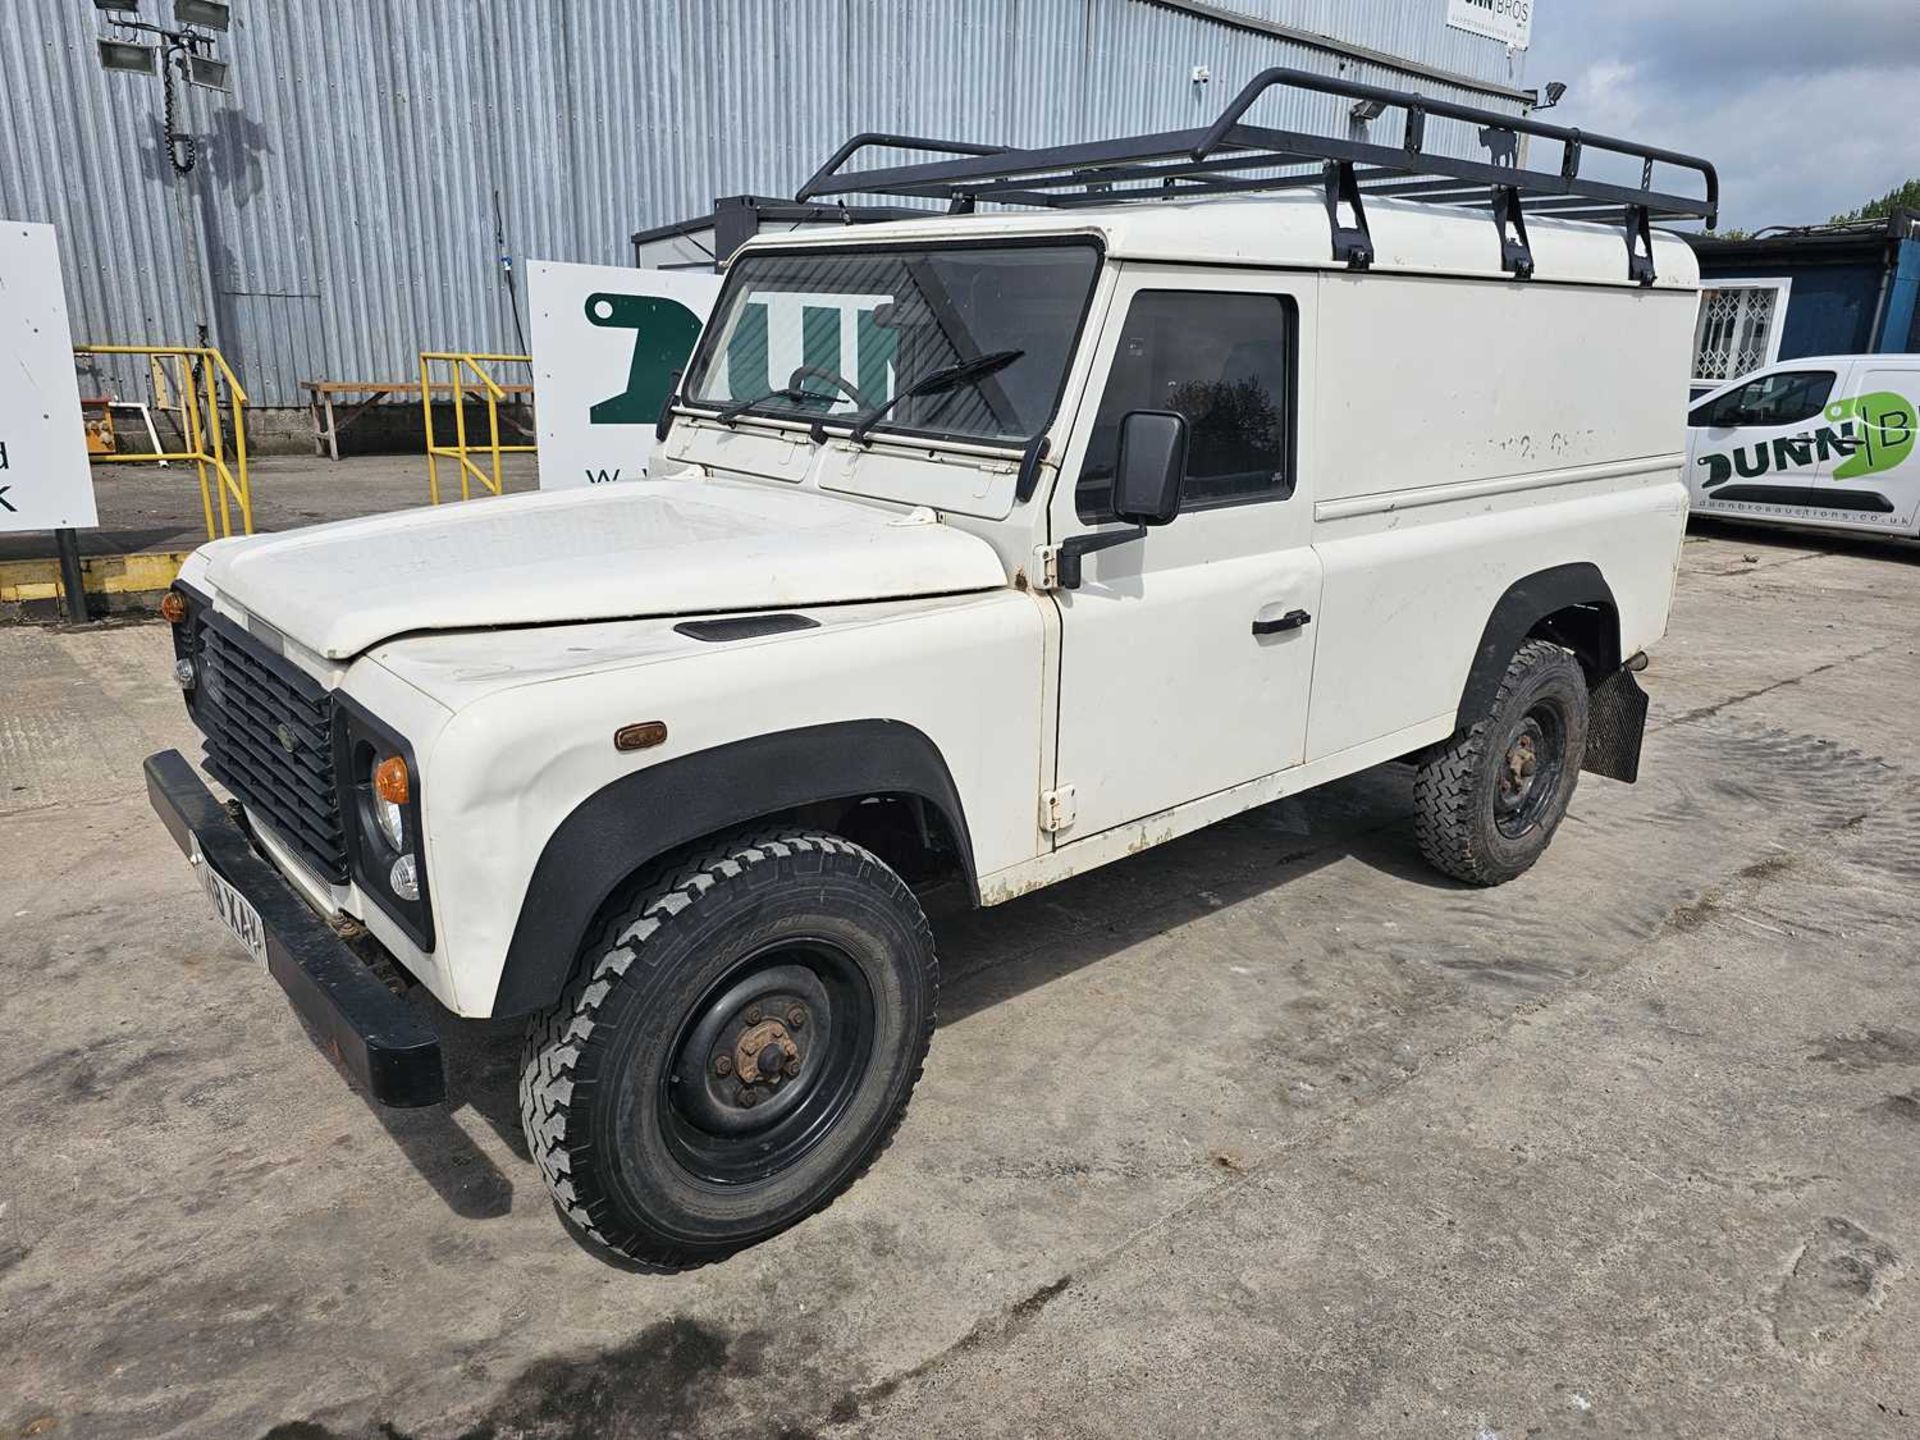 2001 Landrover Defender 110 TD5, 4WD 5 Speed, Heavy Duty Tow Bar, Tacograph, (Reg. Docs. Available, 